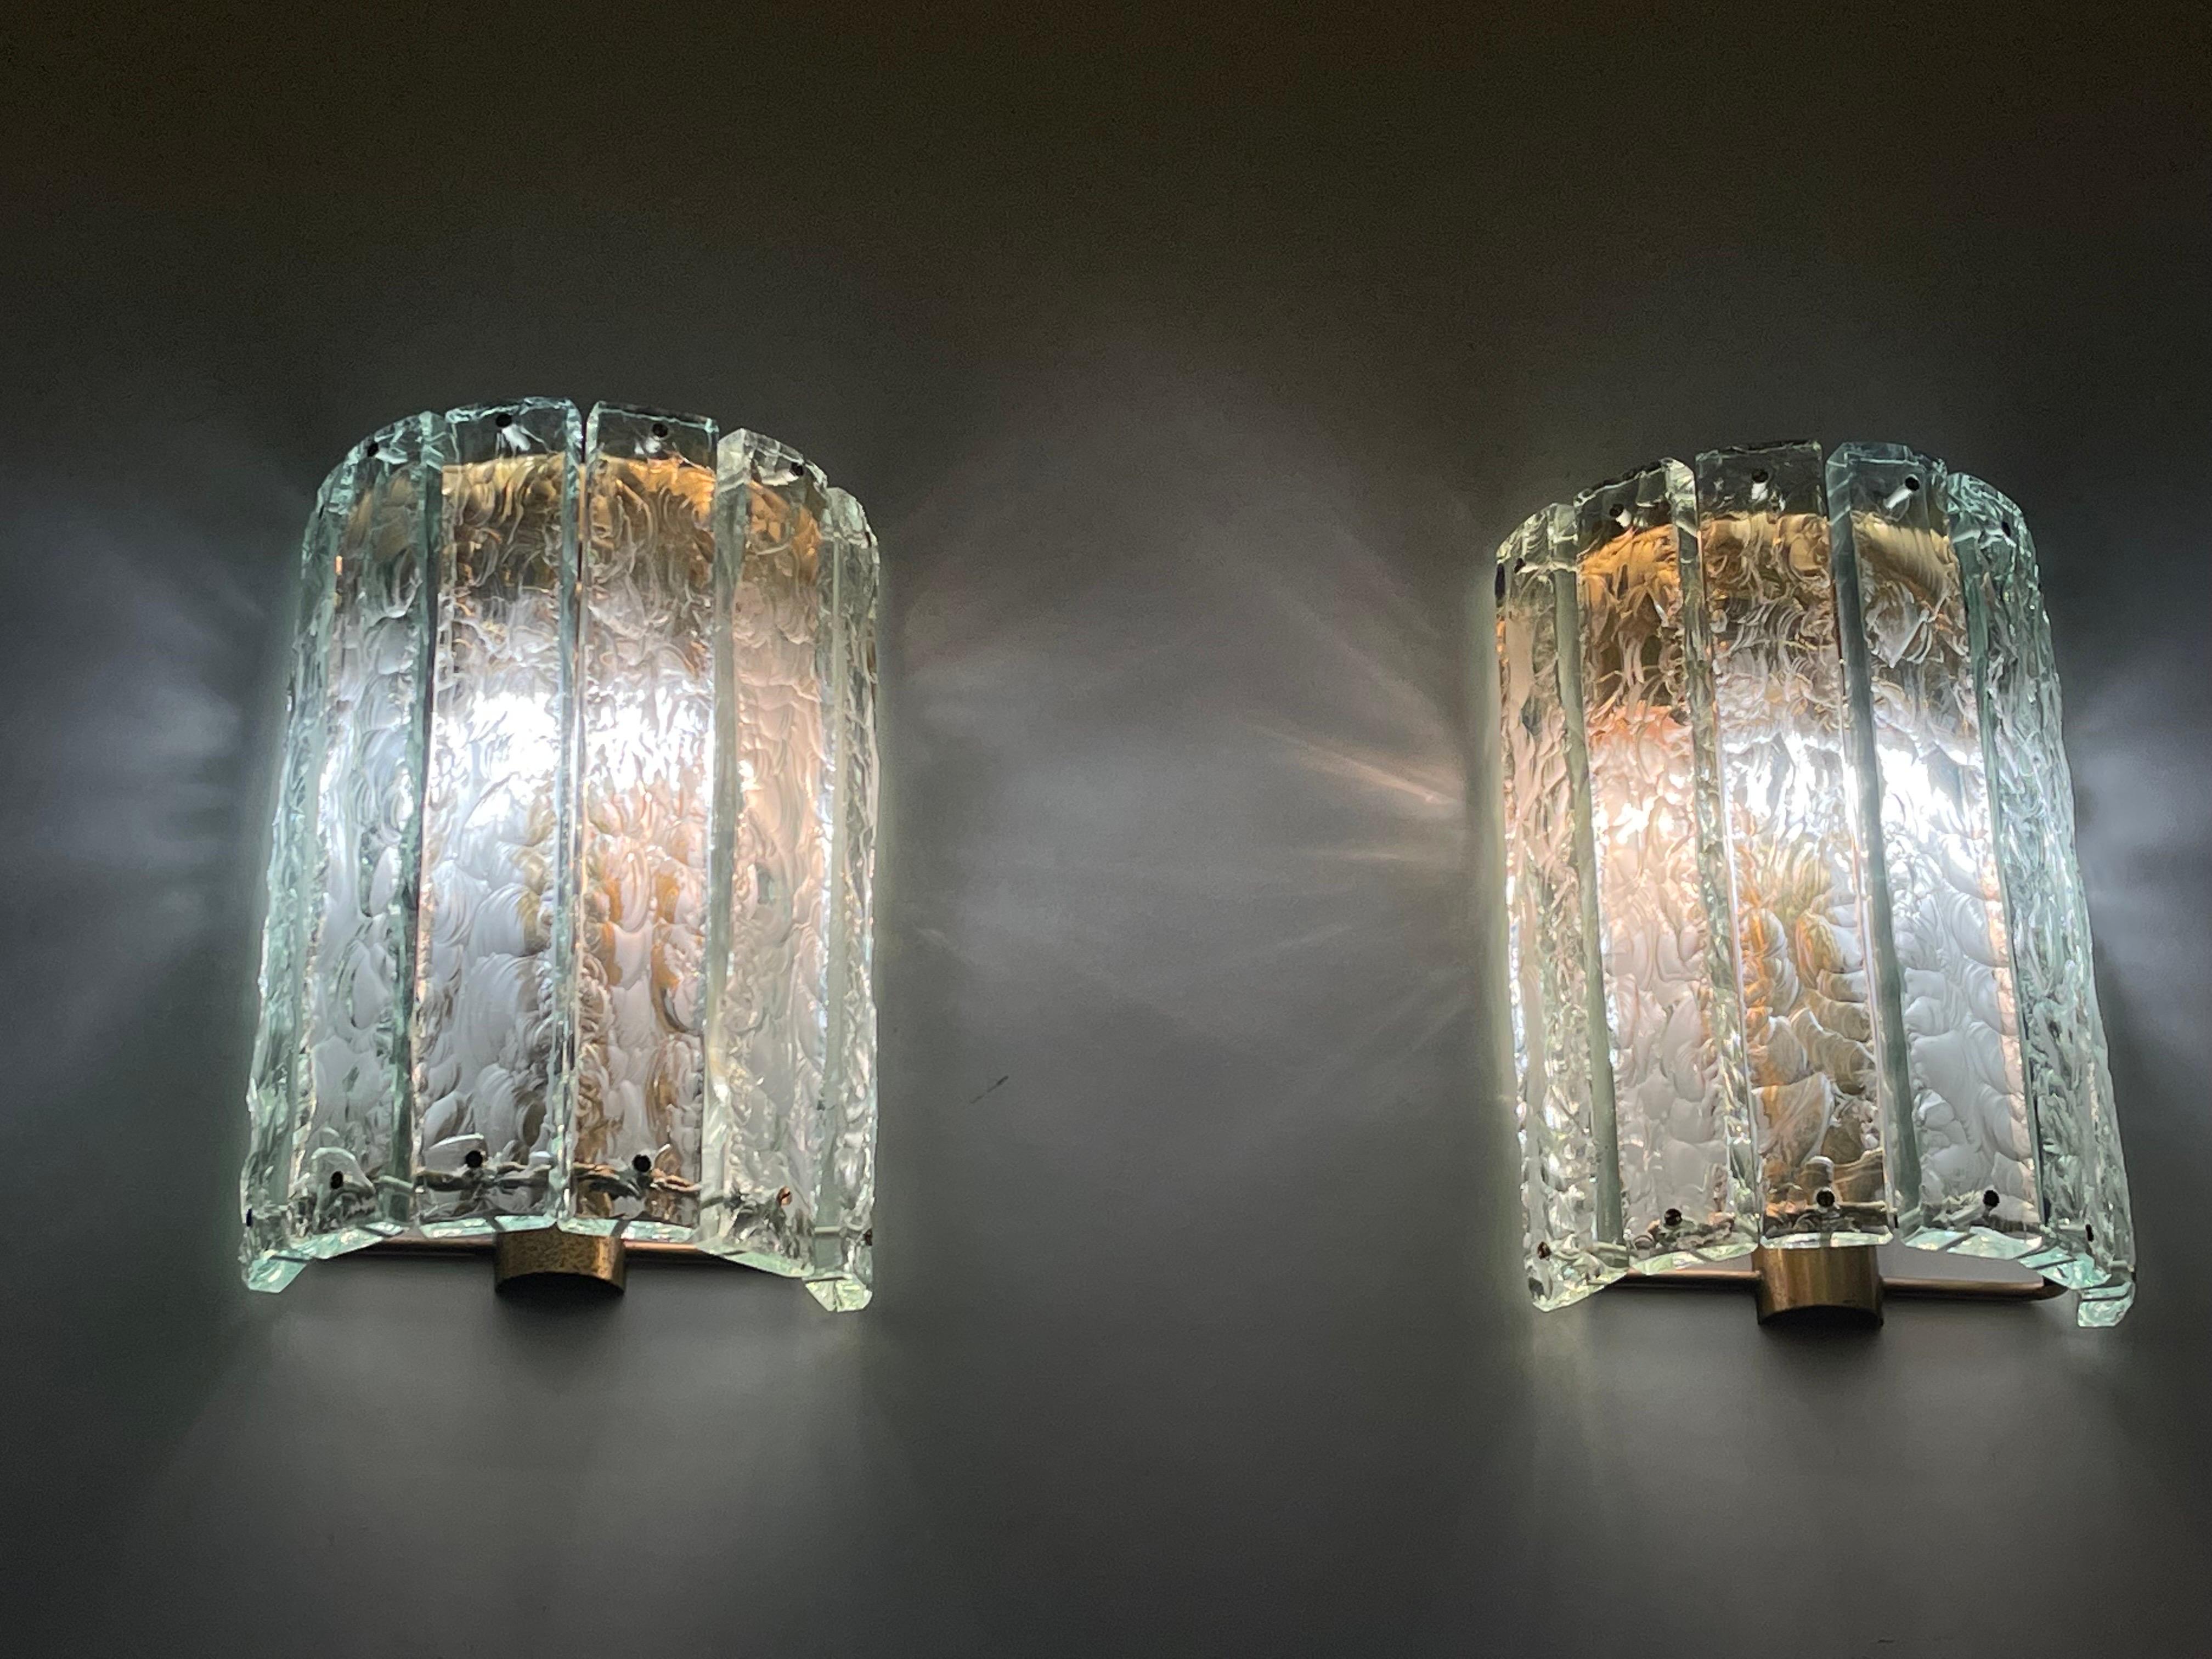 Pair of Fontana Arte sconces by Max Ingrand, based on model 2448 ceiling fixture. Six hand chiseled crystal diffusers around a brass demilune structure. 
Socket: each 4 x E14 for standard screw bulbs.
(Two pairs available)
